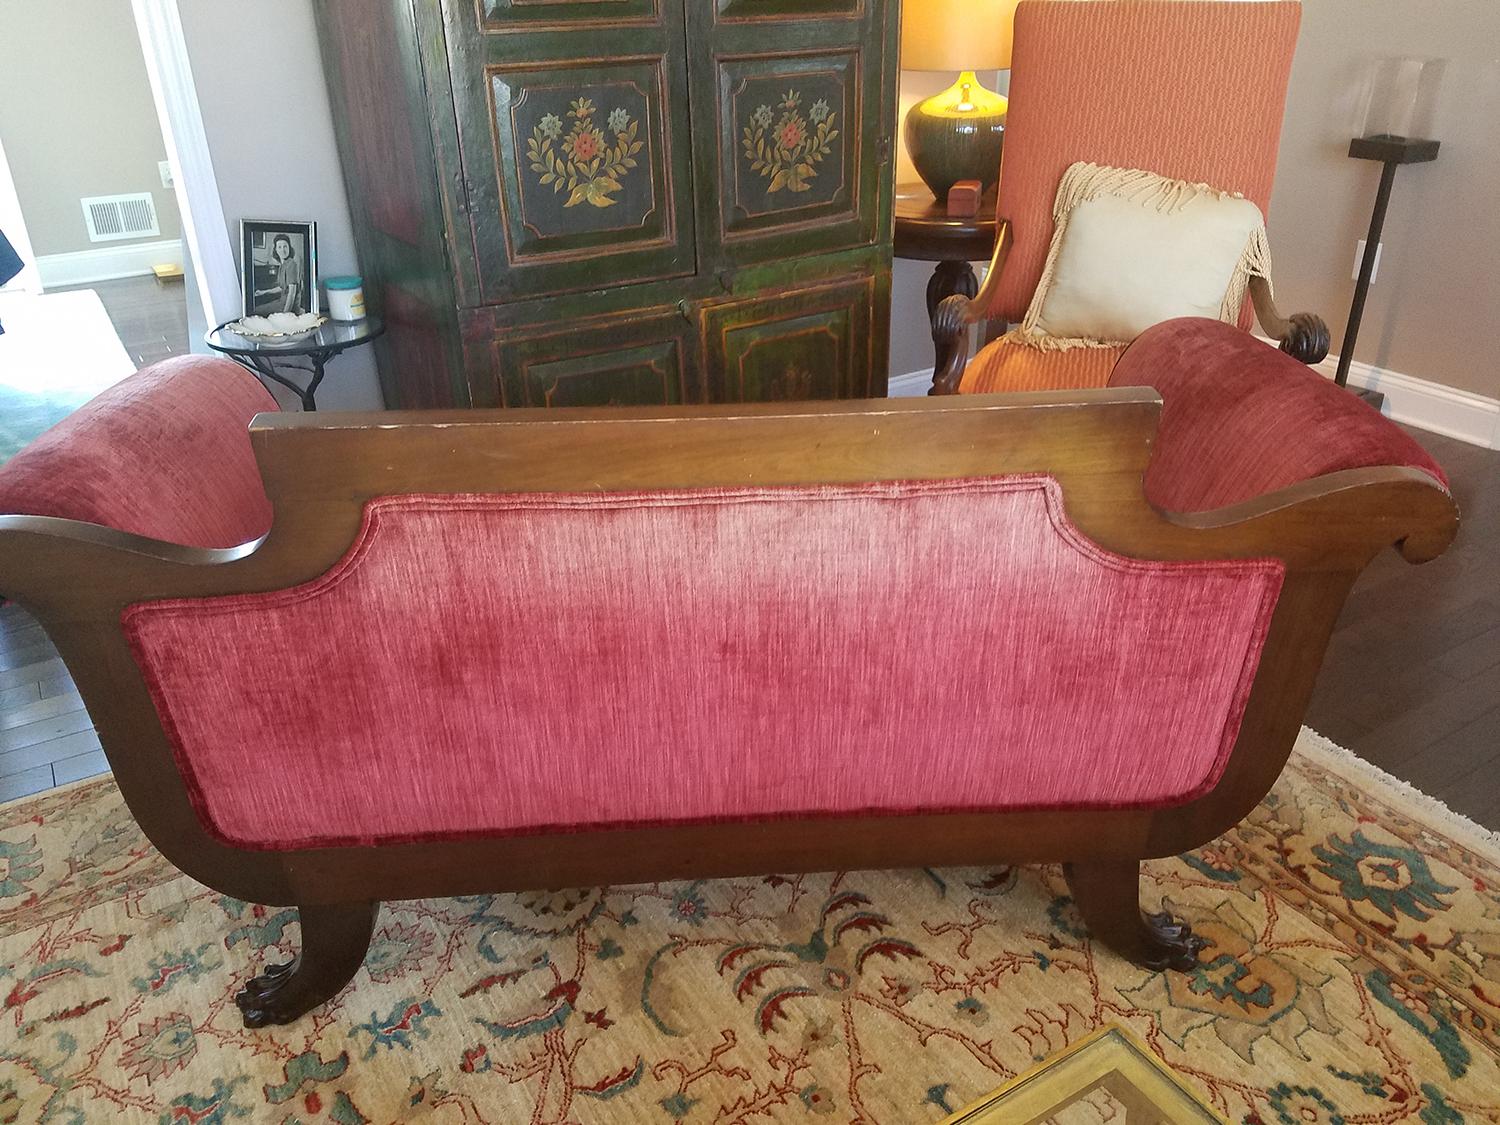 Beautiful carved lion feet loveseat. Upholstered in a rich Italian velvet. There are no rips or worn spots in the fabric but the back is a little faded from the sun. Fitted back and seat with two accent pillows. Please see all photos for detail.